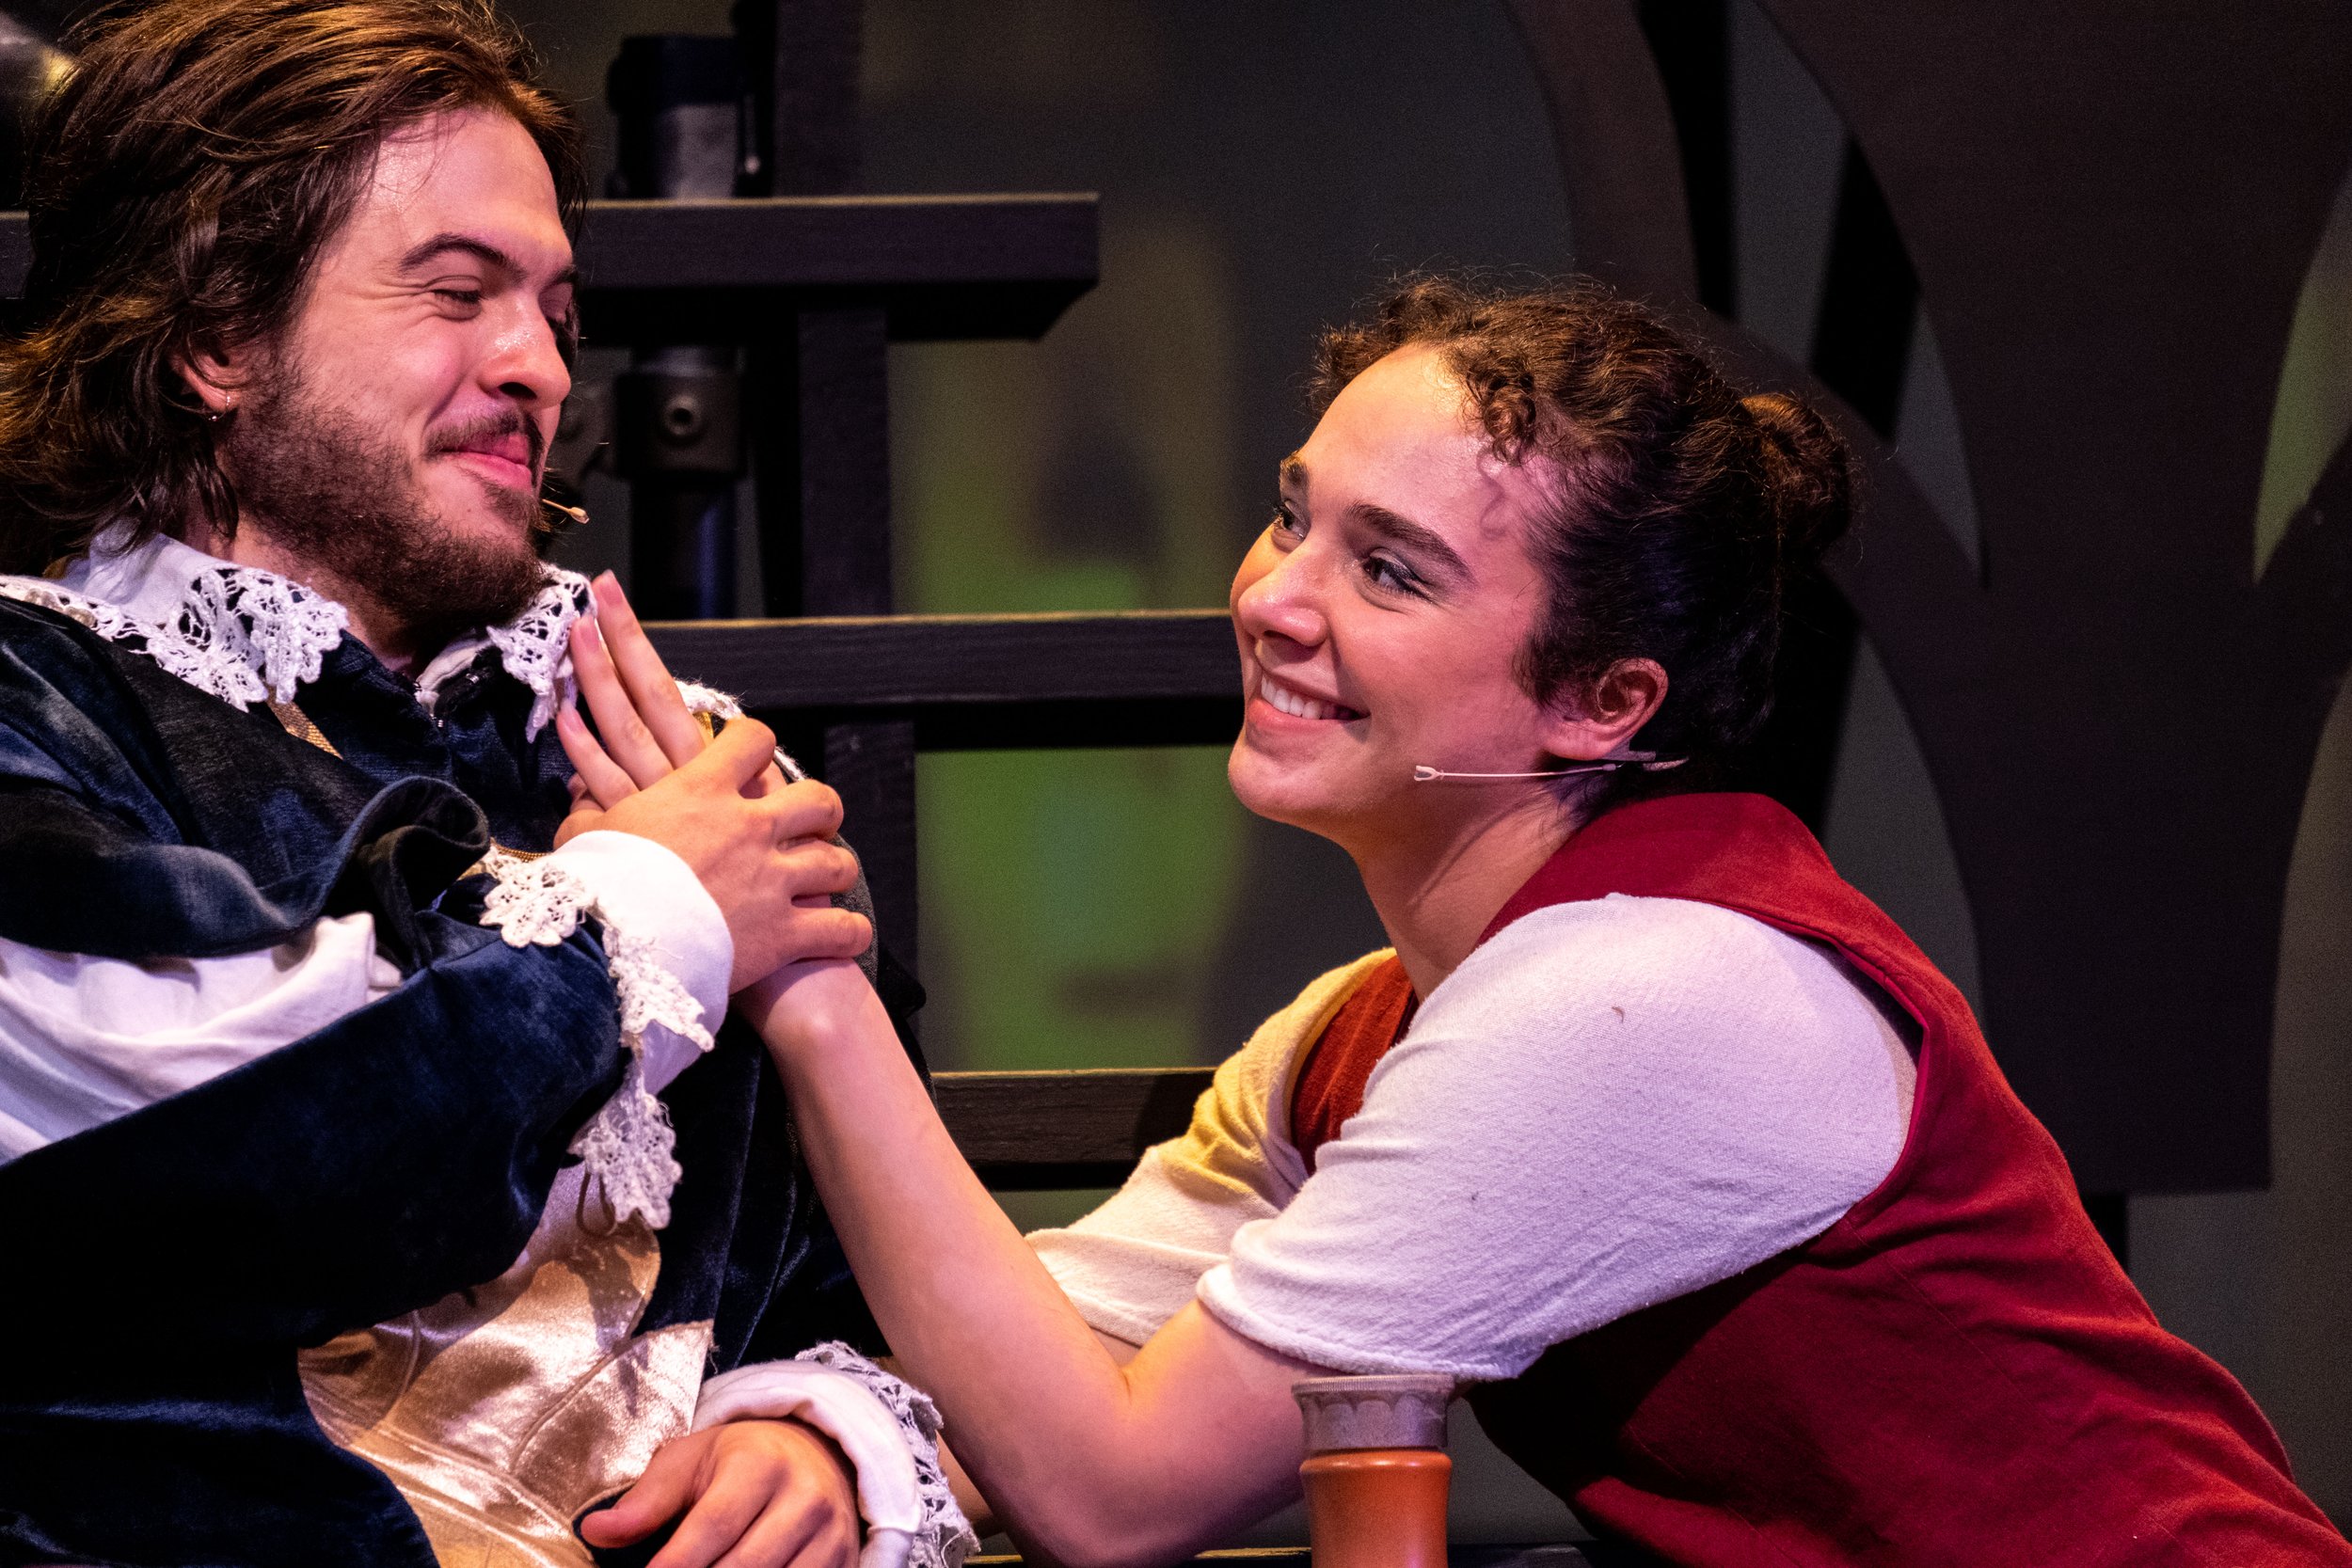  Keelin Jayne (L) as Aramis smiles at Saba Asgair (R) as Sabine as her character becomes drunkenly enamored with him on stage at the Santa Monica College Theater Department Main Stage on the Main Campus in Santa Monica, Calif. during the opening week